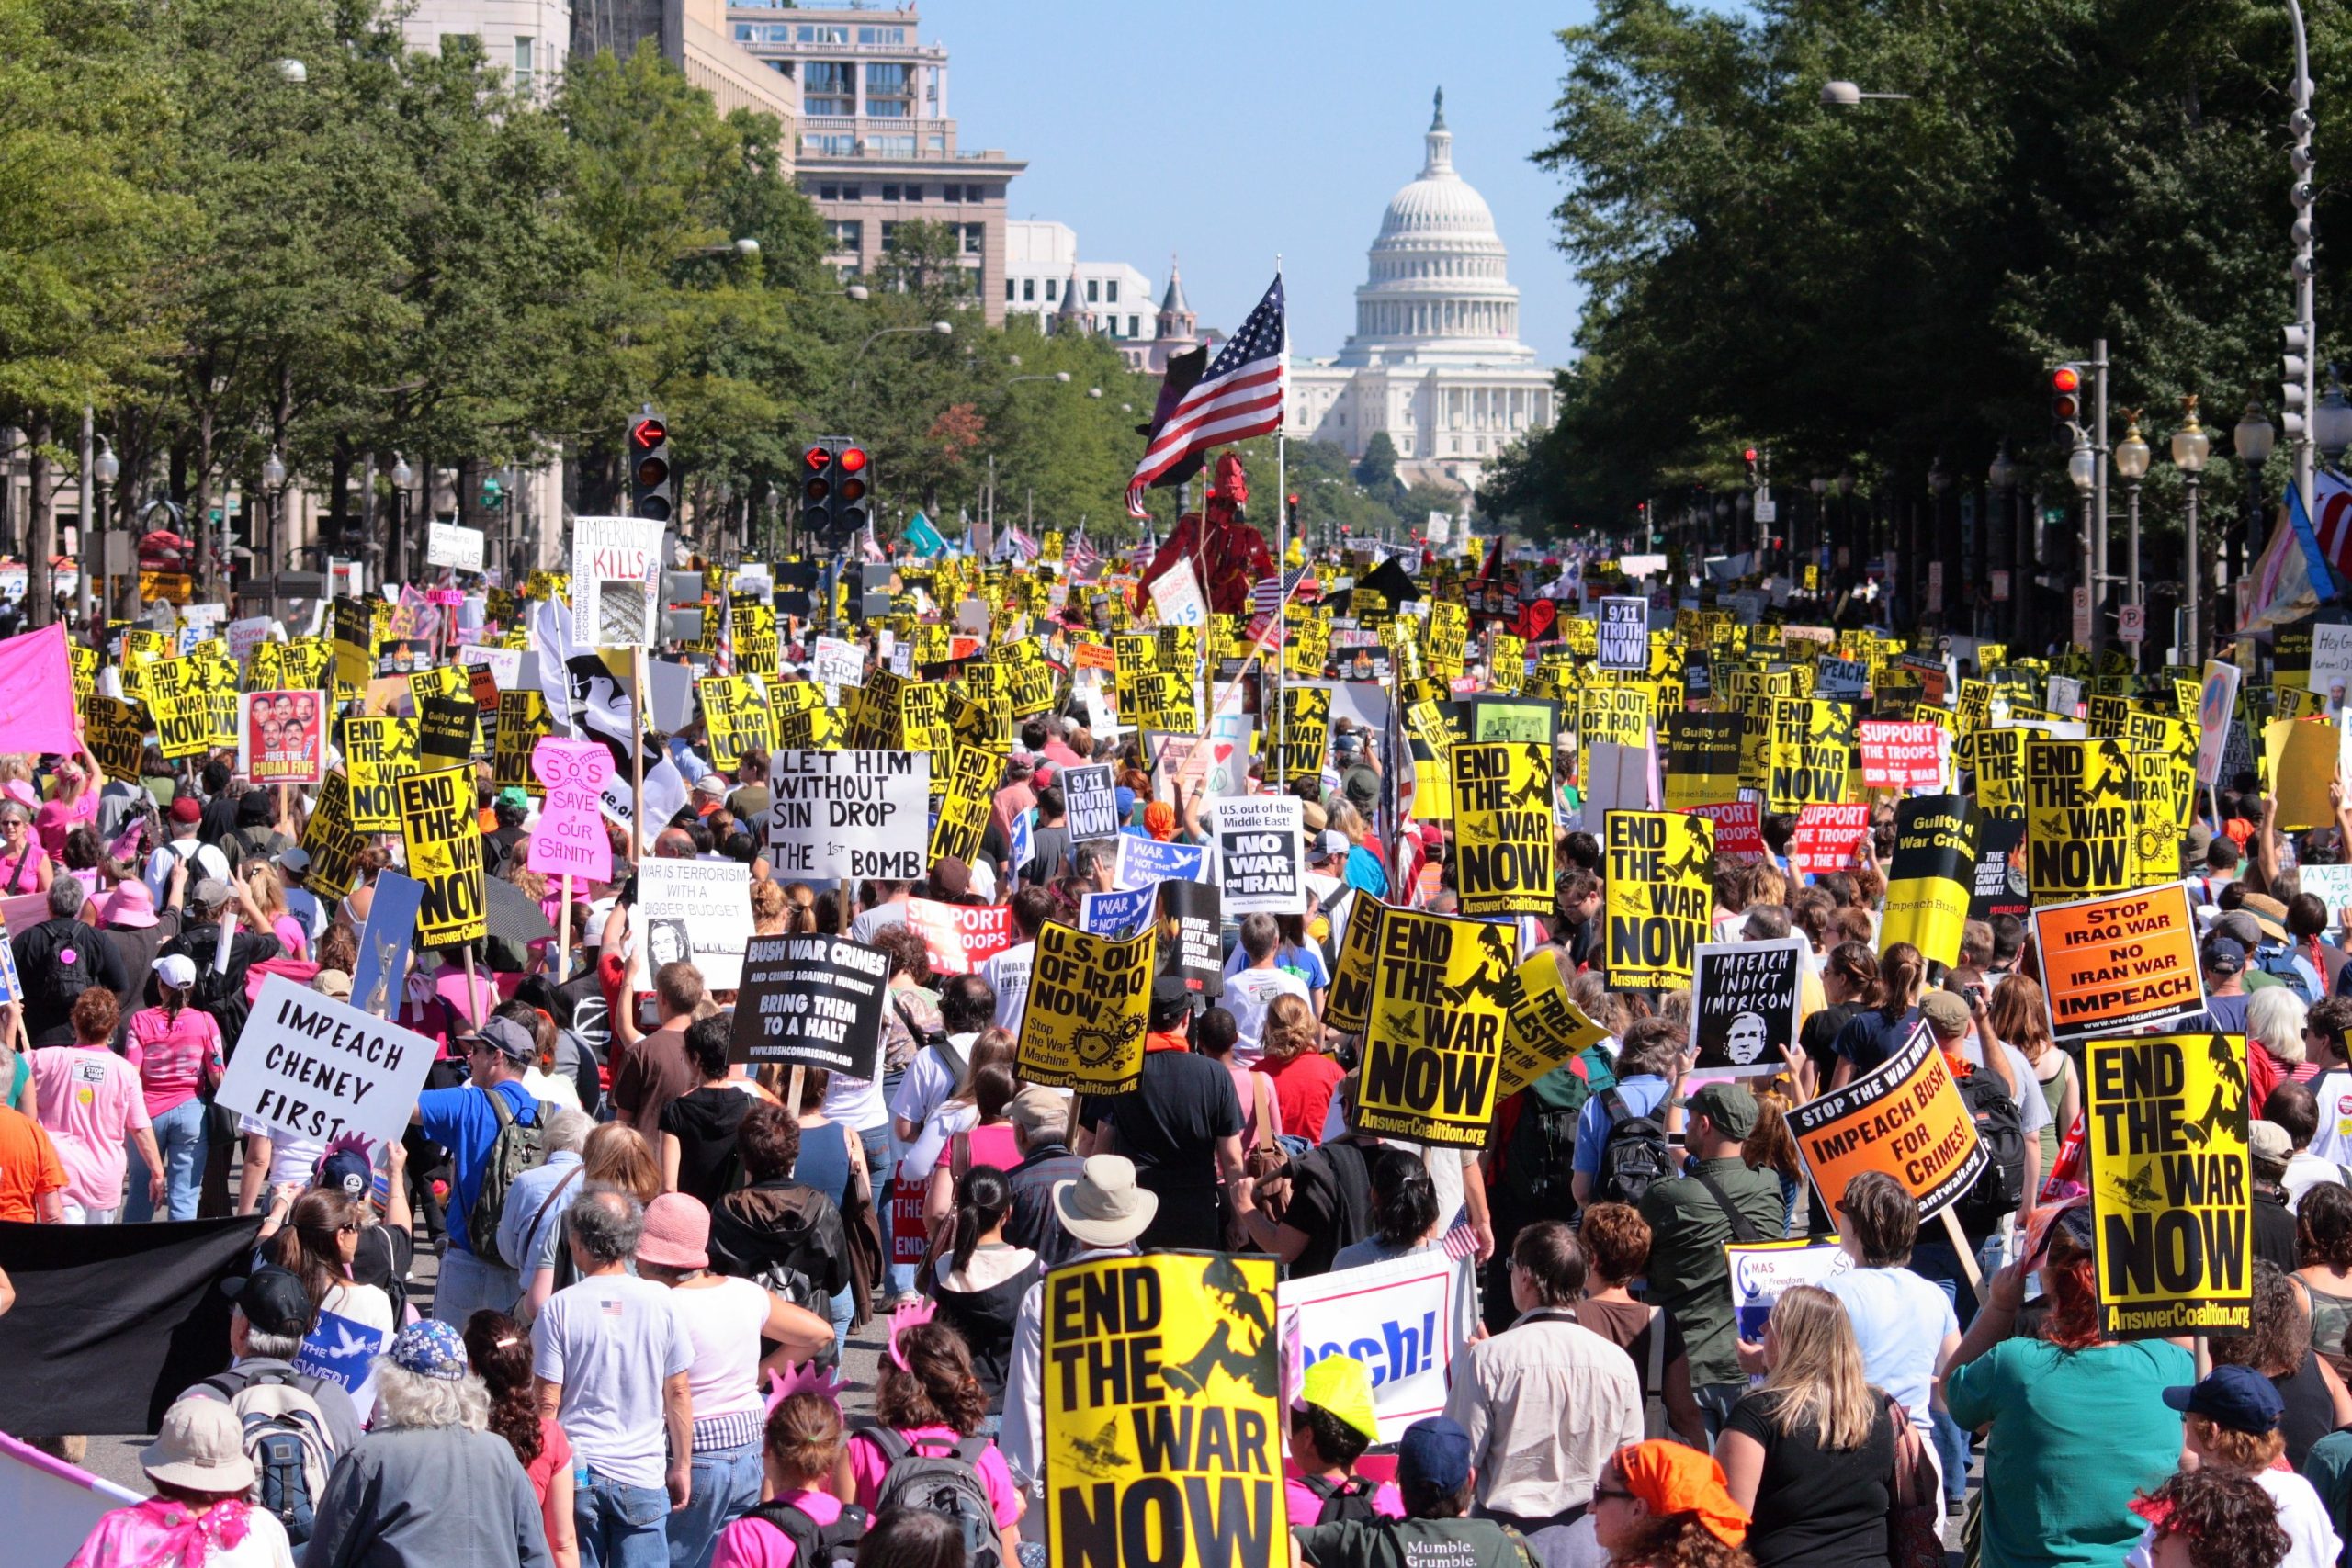 A mass of anti-war protestors march down Pennsylvania Ave. toward the Capitol Building in Washington, DC on September 15, 2007, demonstrating against the Iraq War.